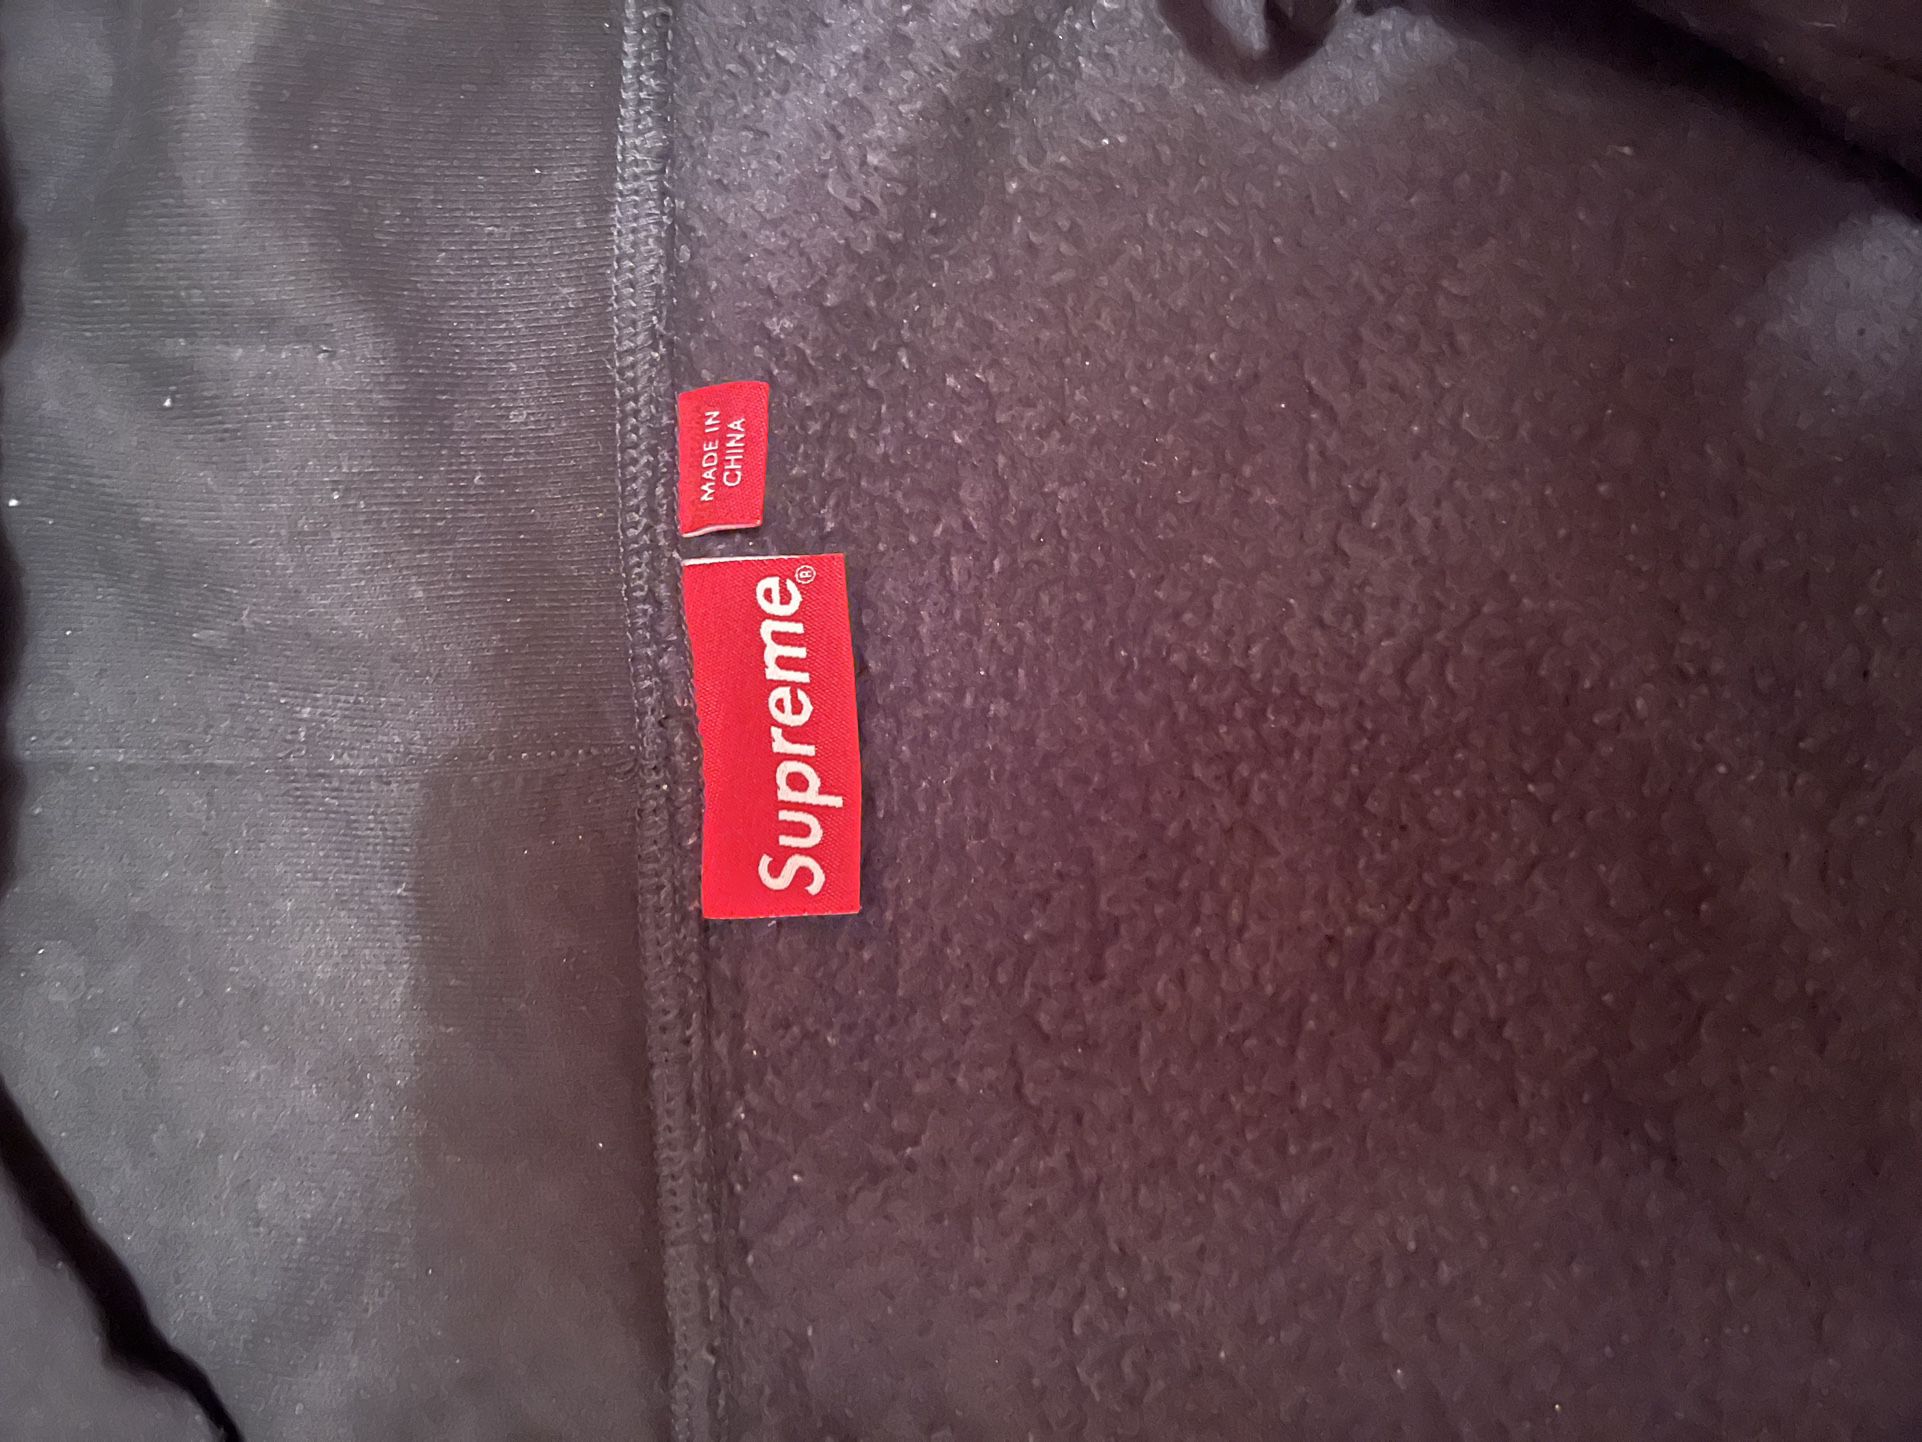 Supreme Box Logo Hoodie Peach for Sale in Syosset, NY - OfferUp